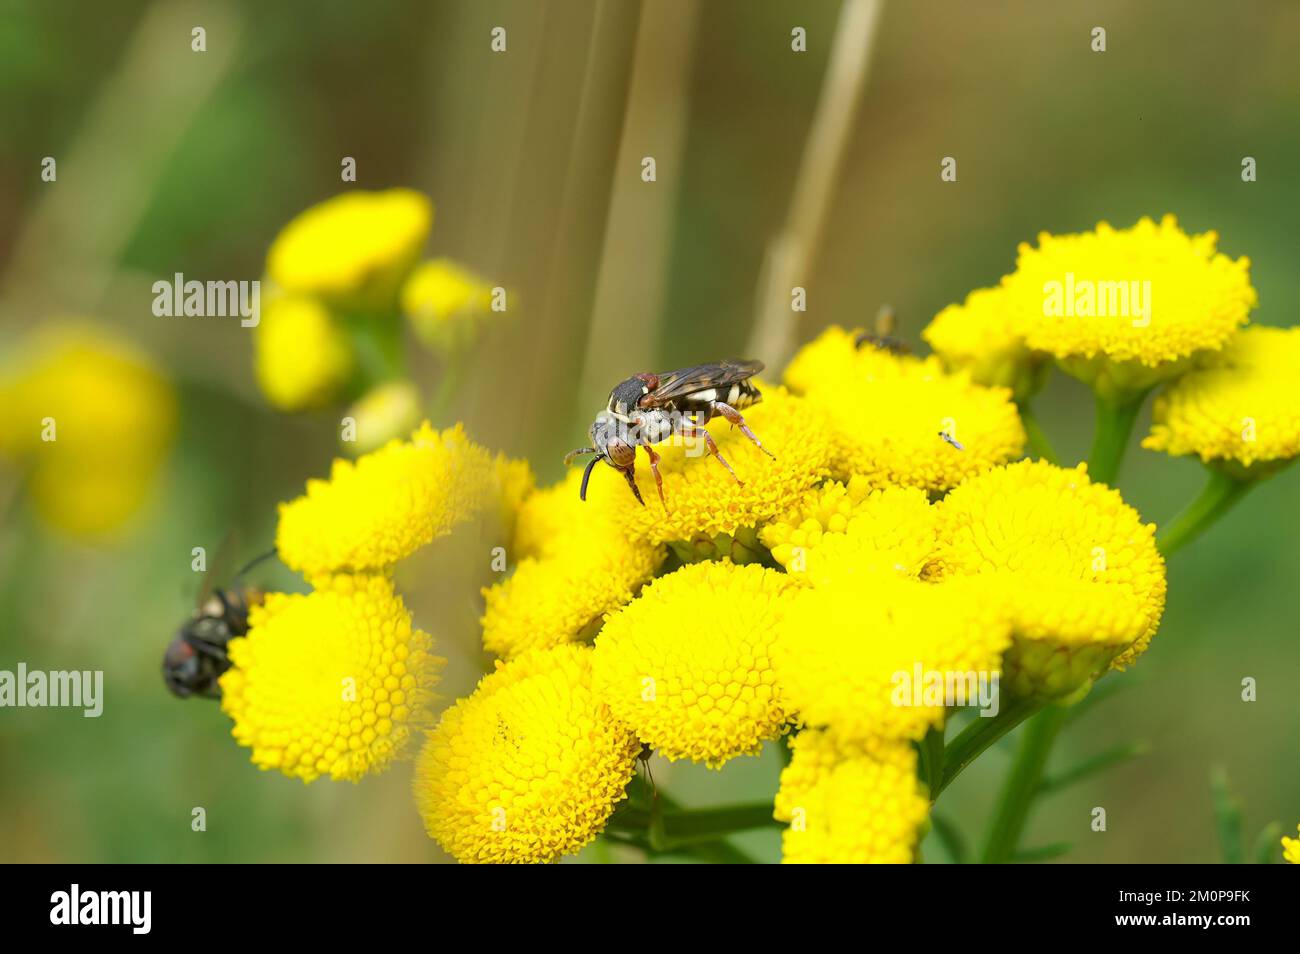 A closeup of a rare solitary cuckoo bee on a vibrant yellow tansy flower in the wilderness Stock Photo